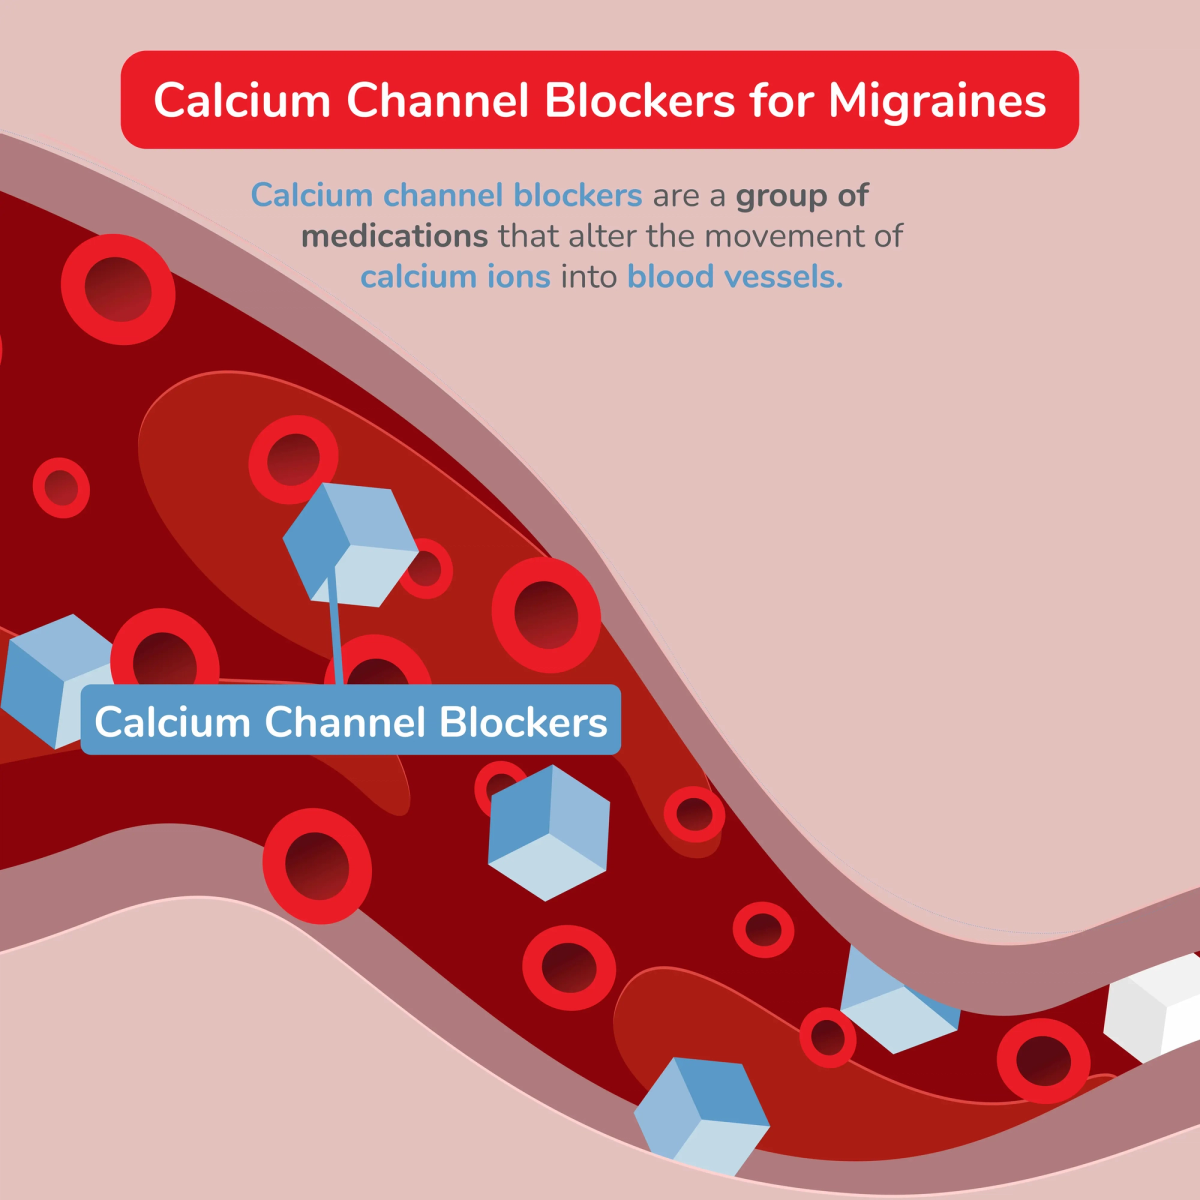 Illustration of Calcium Channel Blockers Altering the Movement of Calcium Ions into Blood Vessels